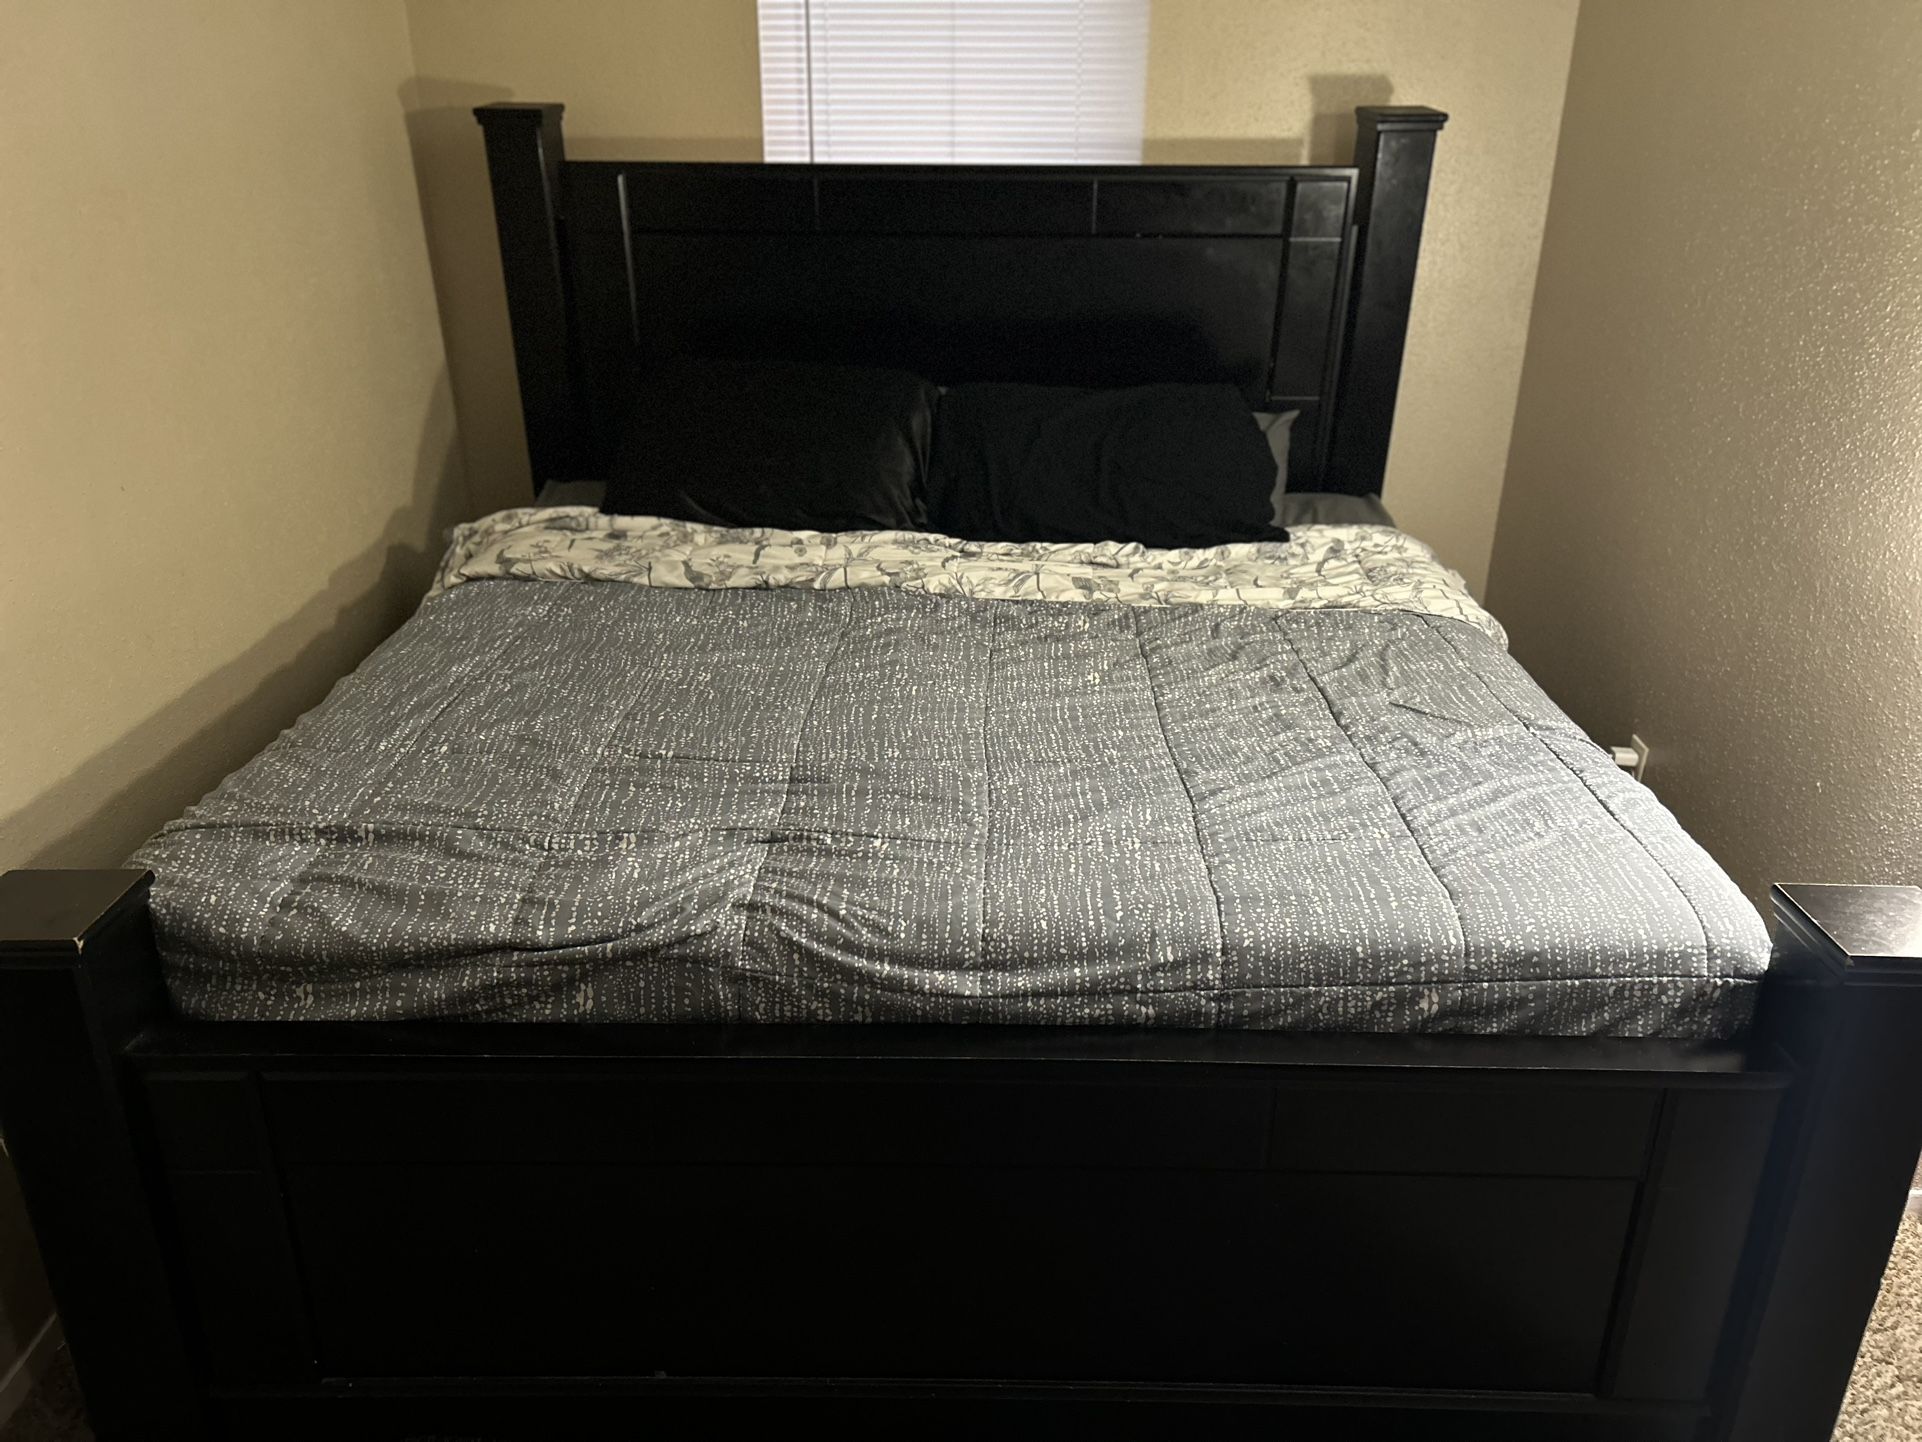 Ashley furniture king size Bed frame And side table